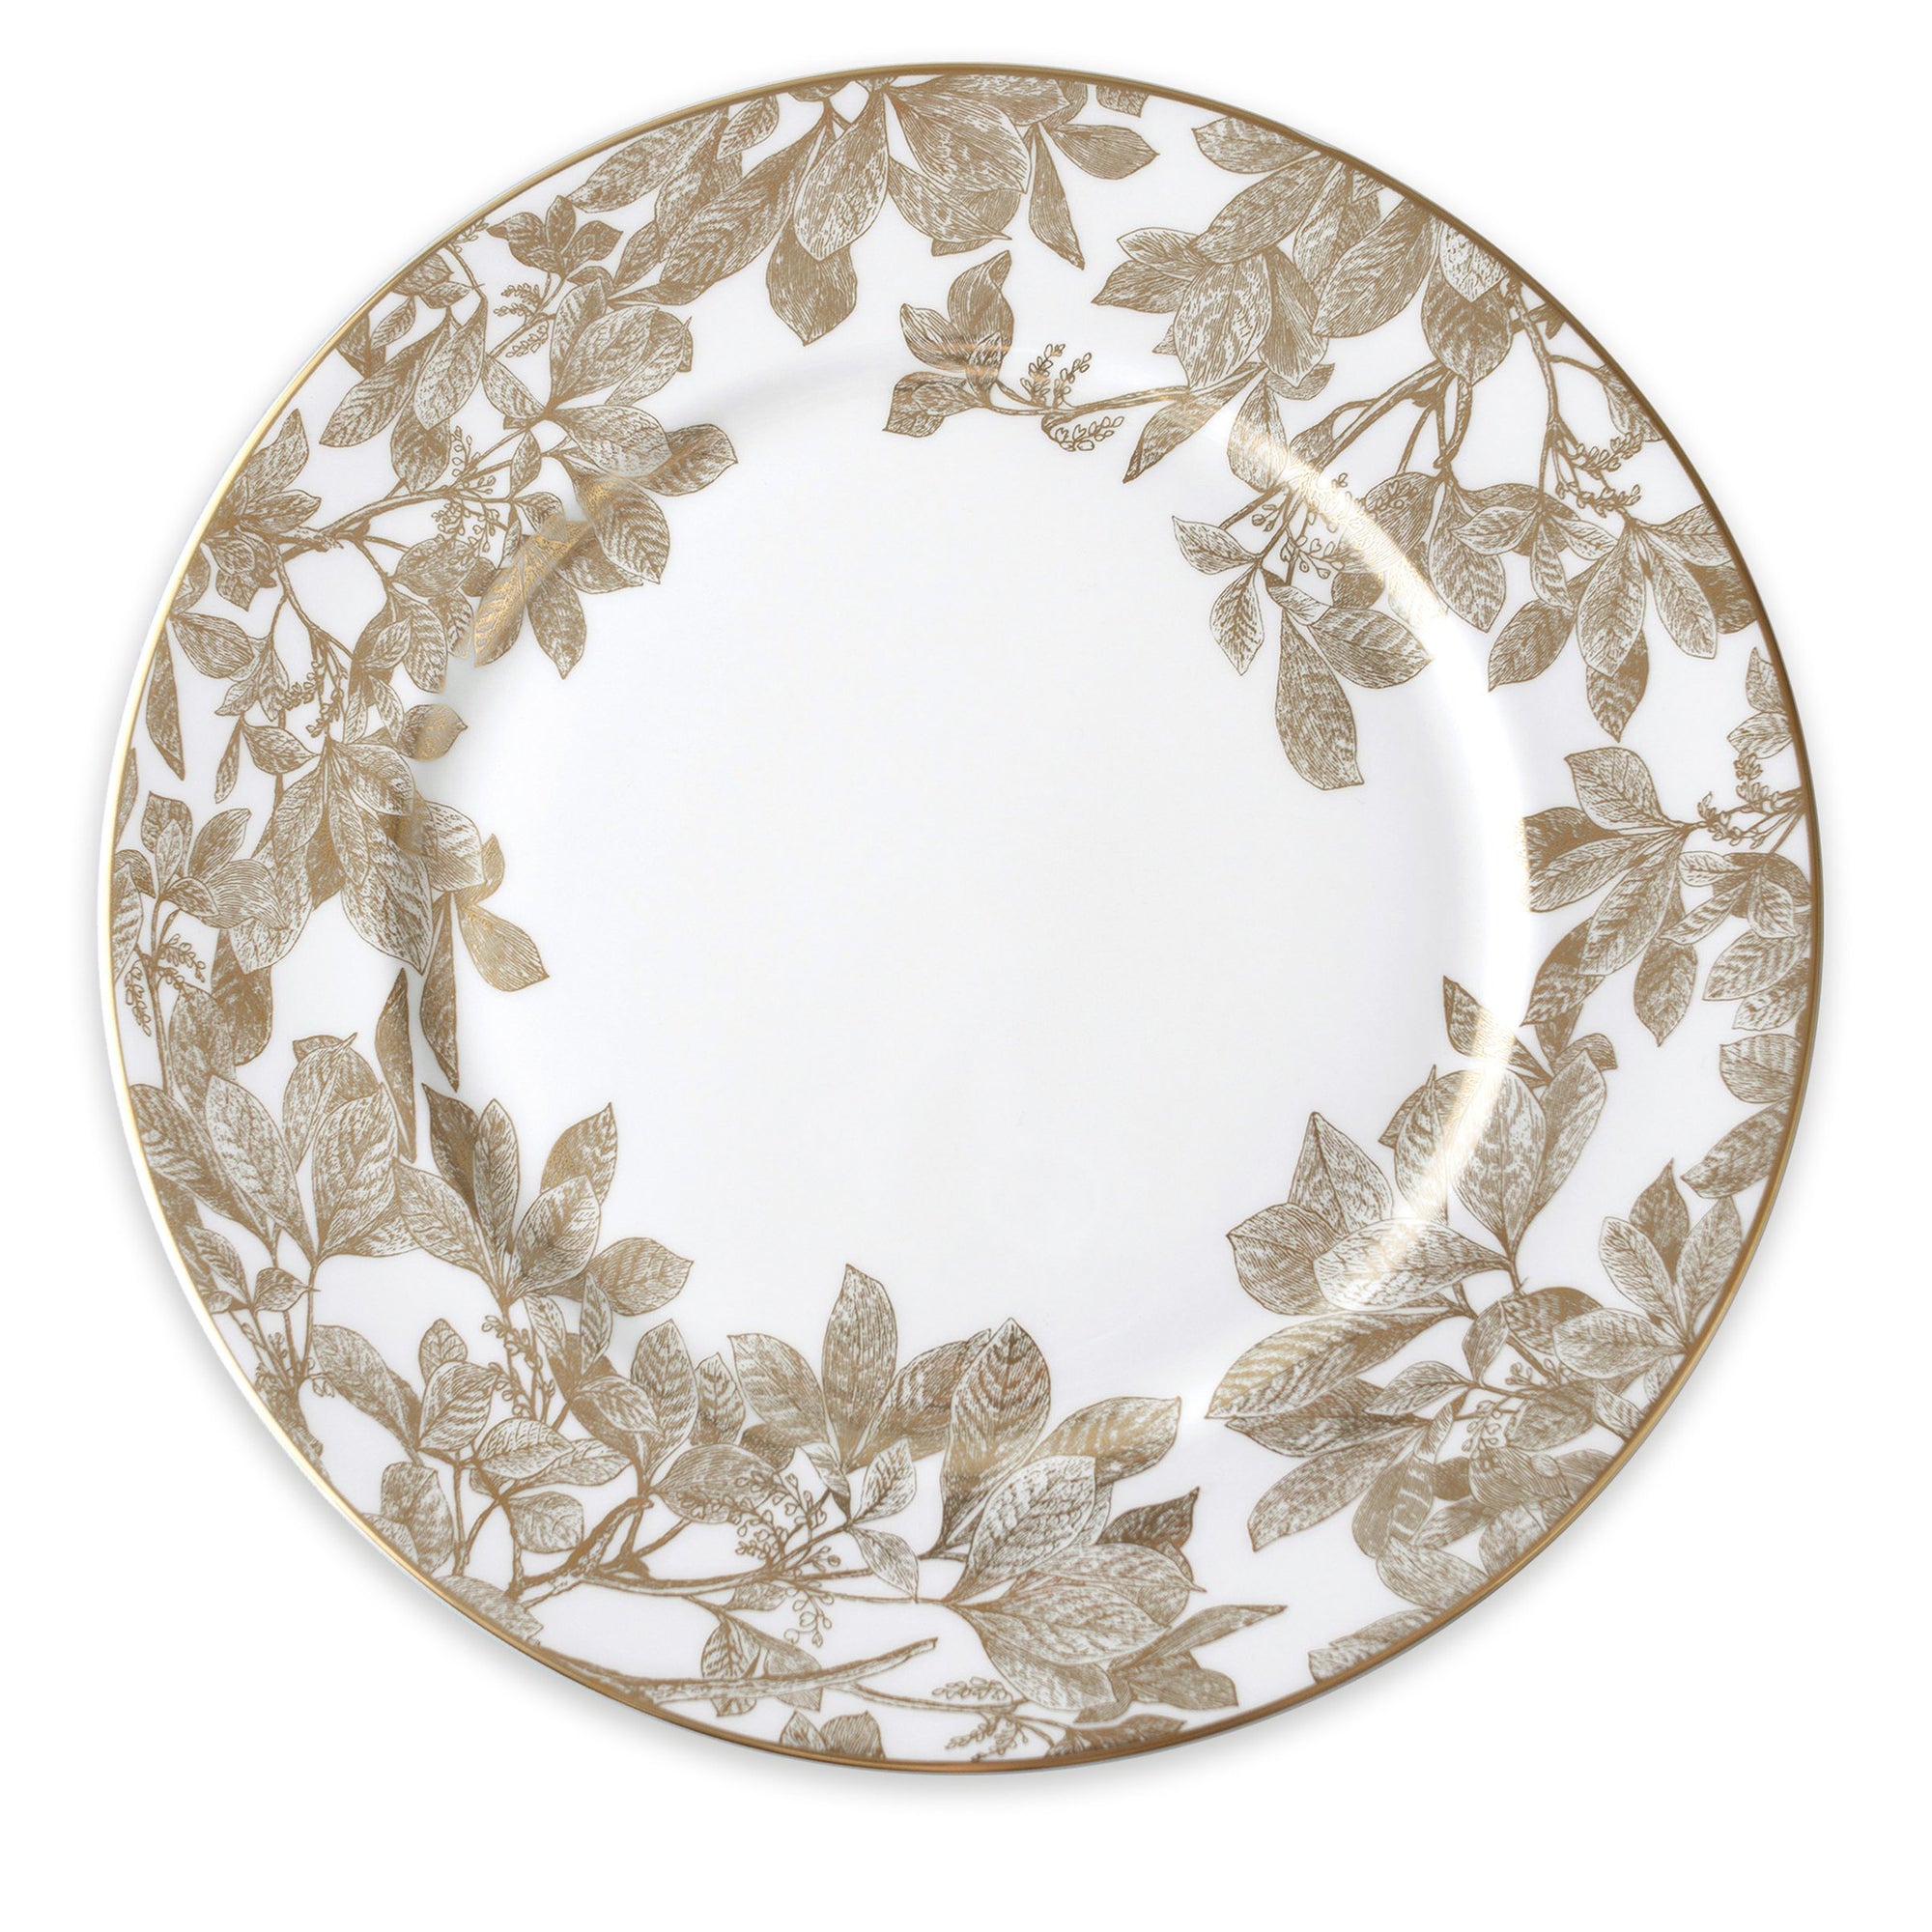 A Caskata Artisanal Home Arbor Gold Rimmed Charger with gold leaf pattern botanical details around the edge.